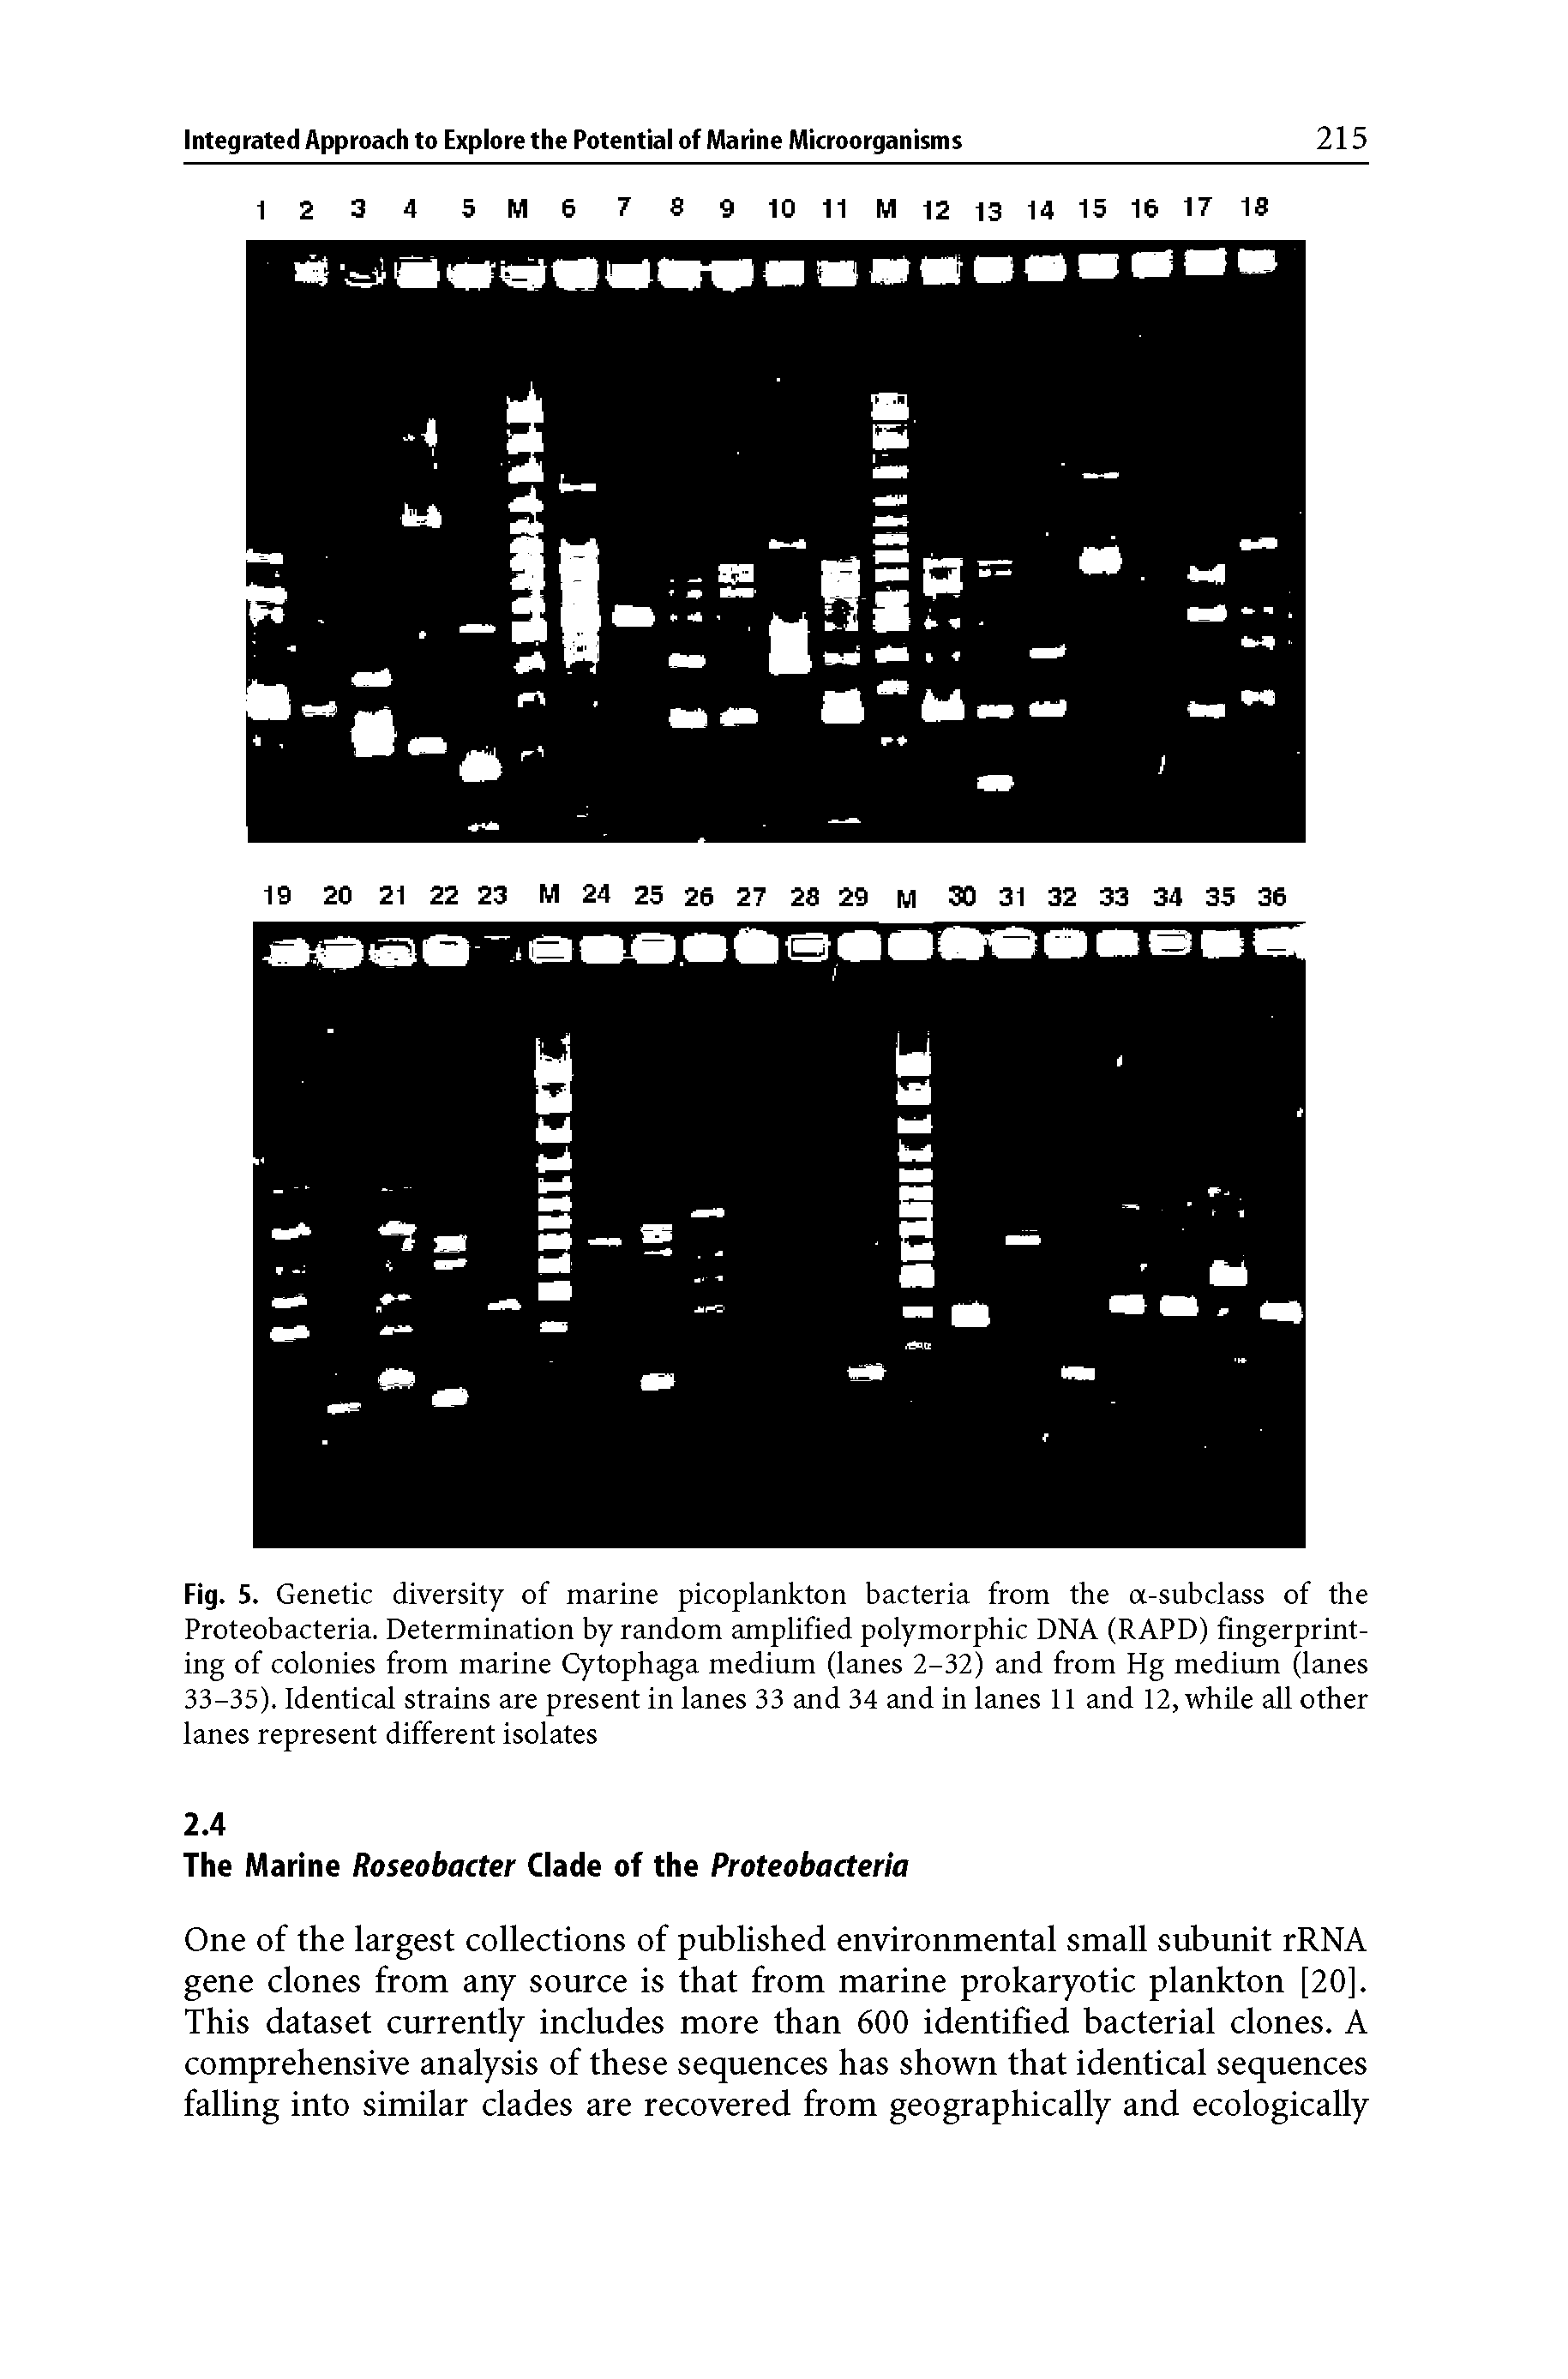 Fig. 5. Genetic diversity of marine picoplankton bacteria from the a-subclass of the Proteobacteria. Determination by random amplified polymorphic DNA (RAPD) fingerprinting of colonies from marine Cytophaga medium (lanes 2-32) and from Hg medium (lanes 33-35). Identical strains are present in lanes 33 and 34 and in lanes 11 and 12, while all other lanes represent different isolates...